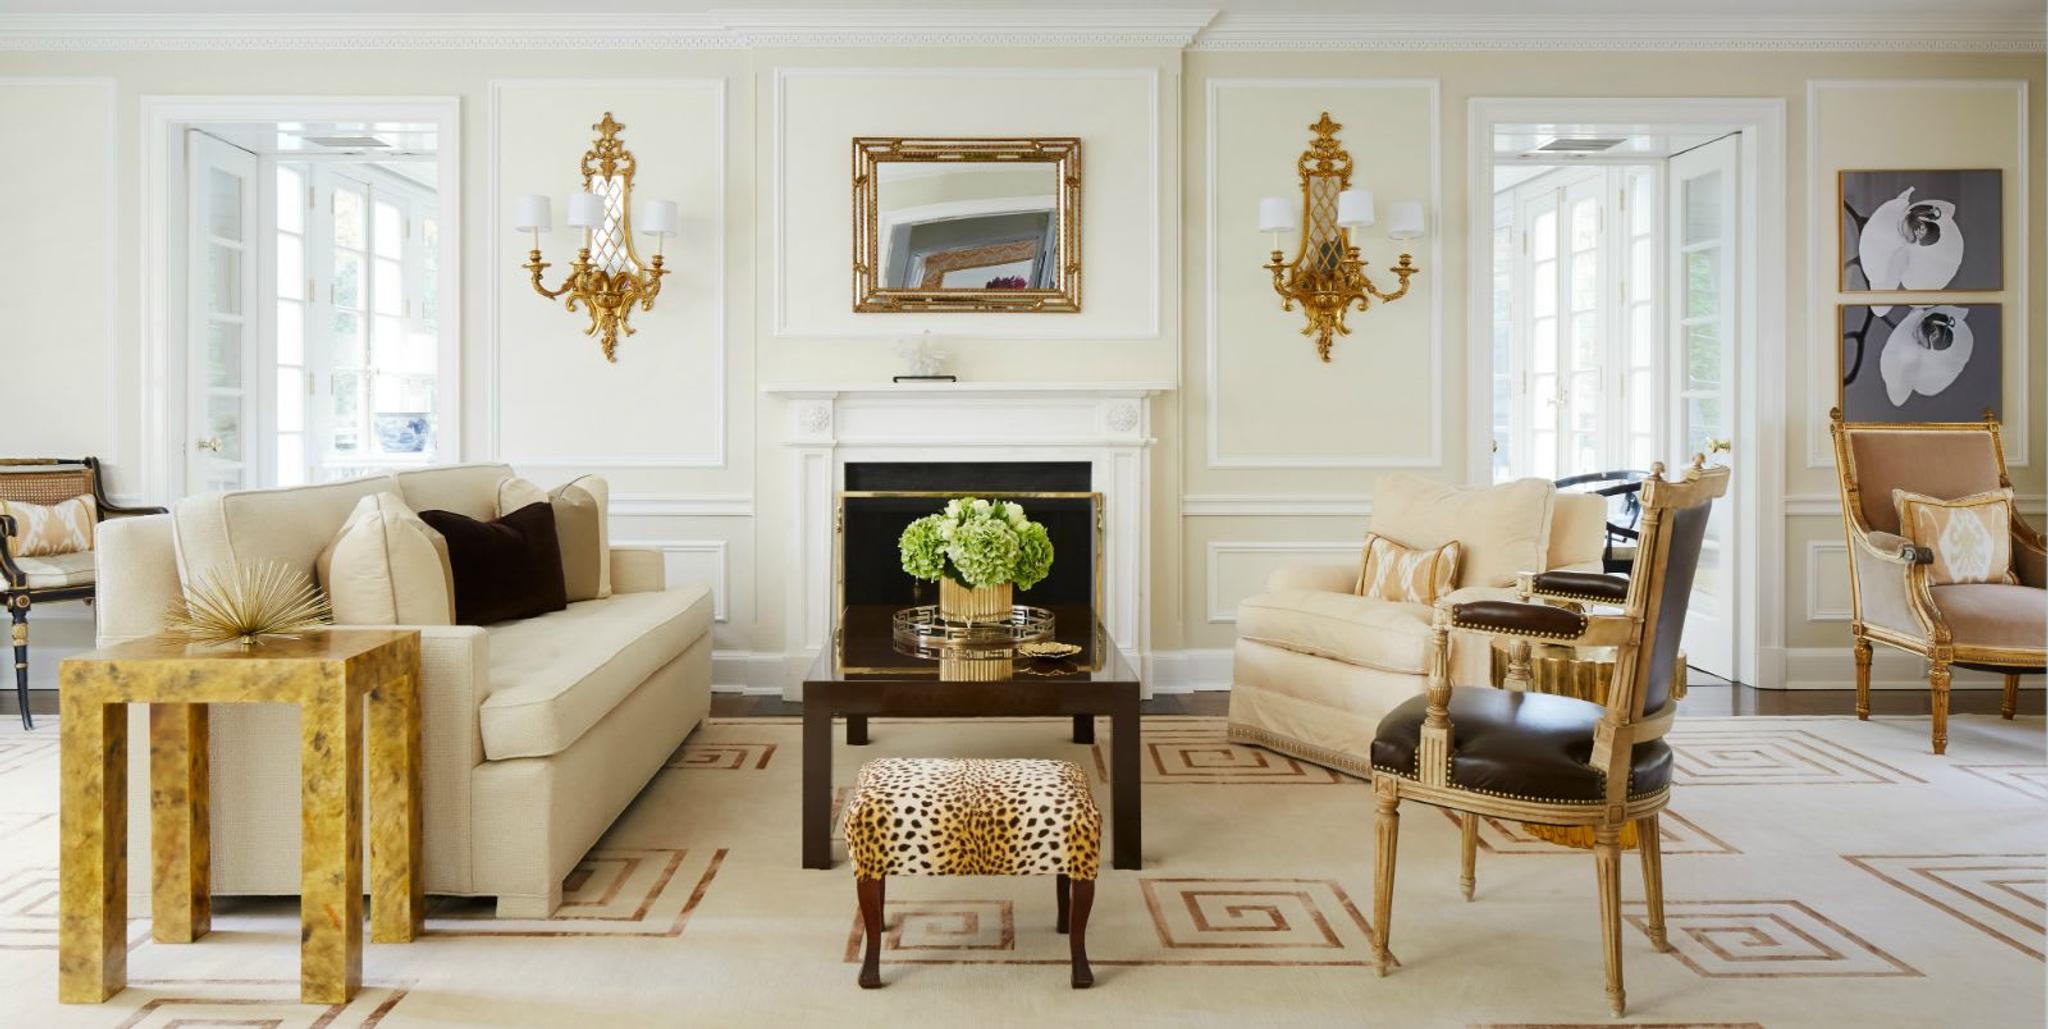 Shelley Johnstone Paschke living room characterized by warm neutrals and golden accents that give a very elegant feel.